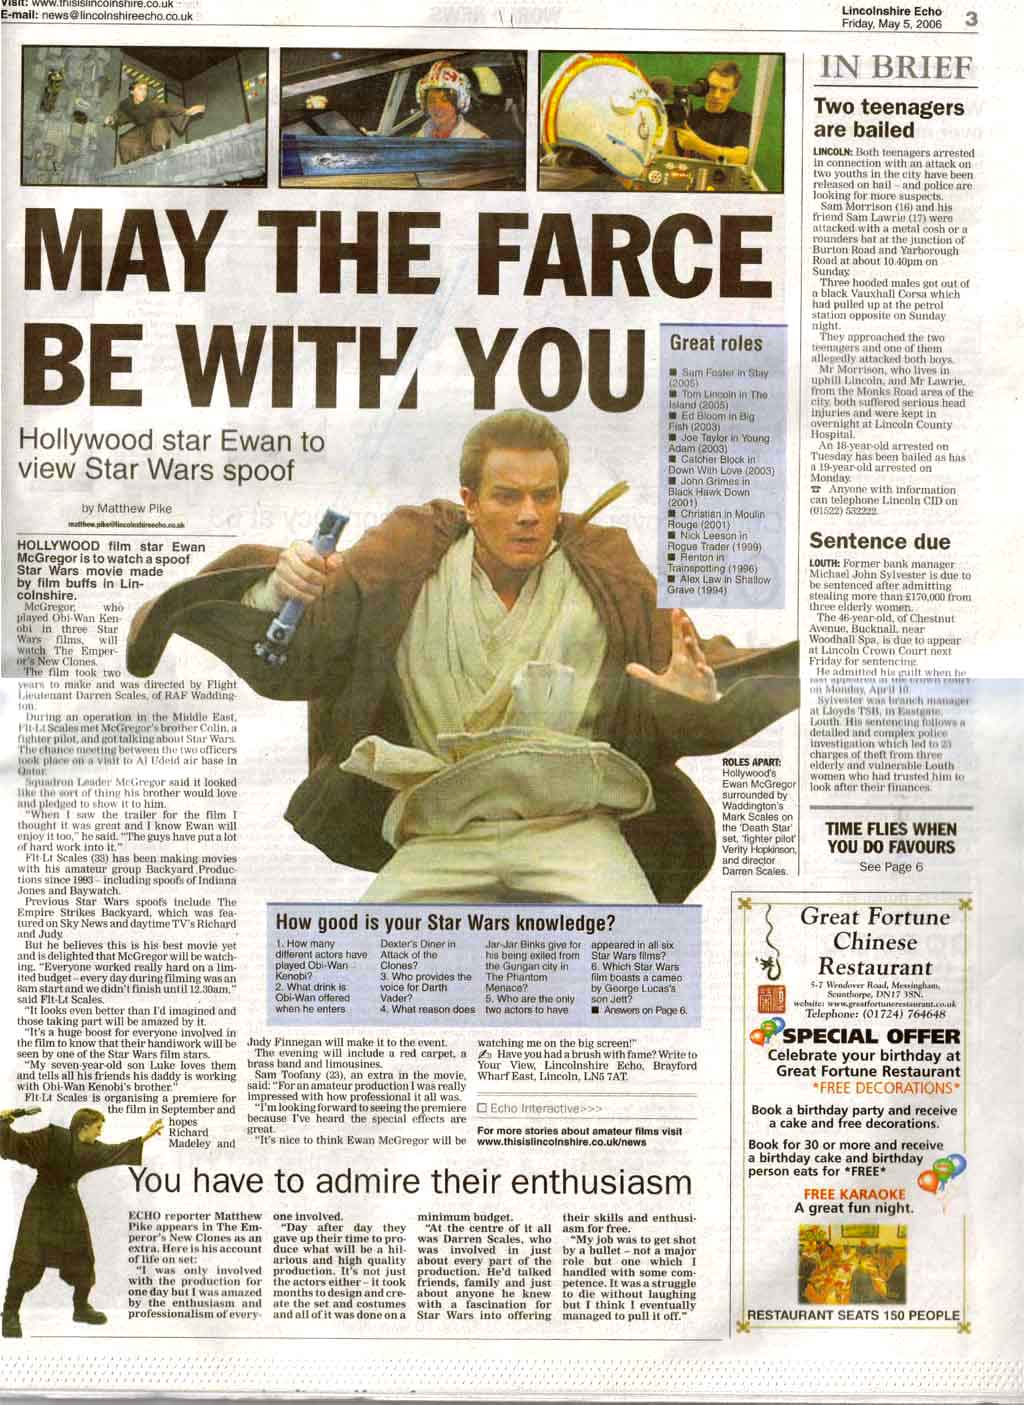 May the farce be with you